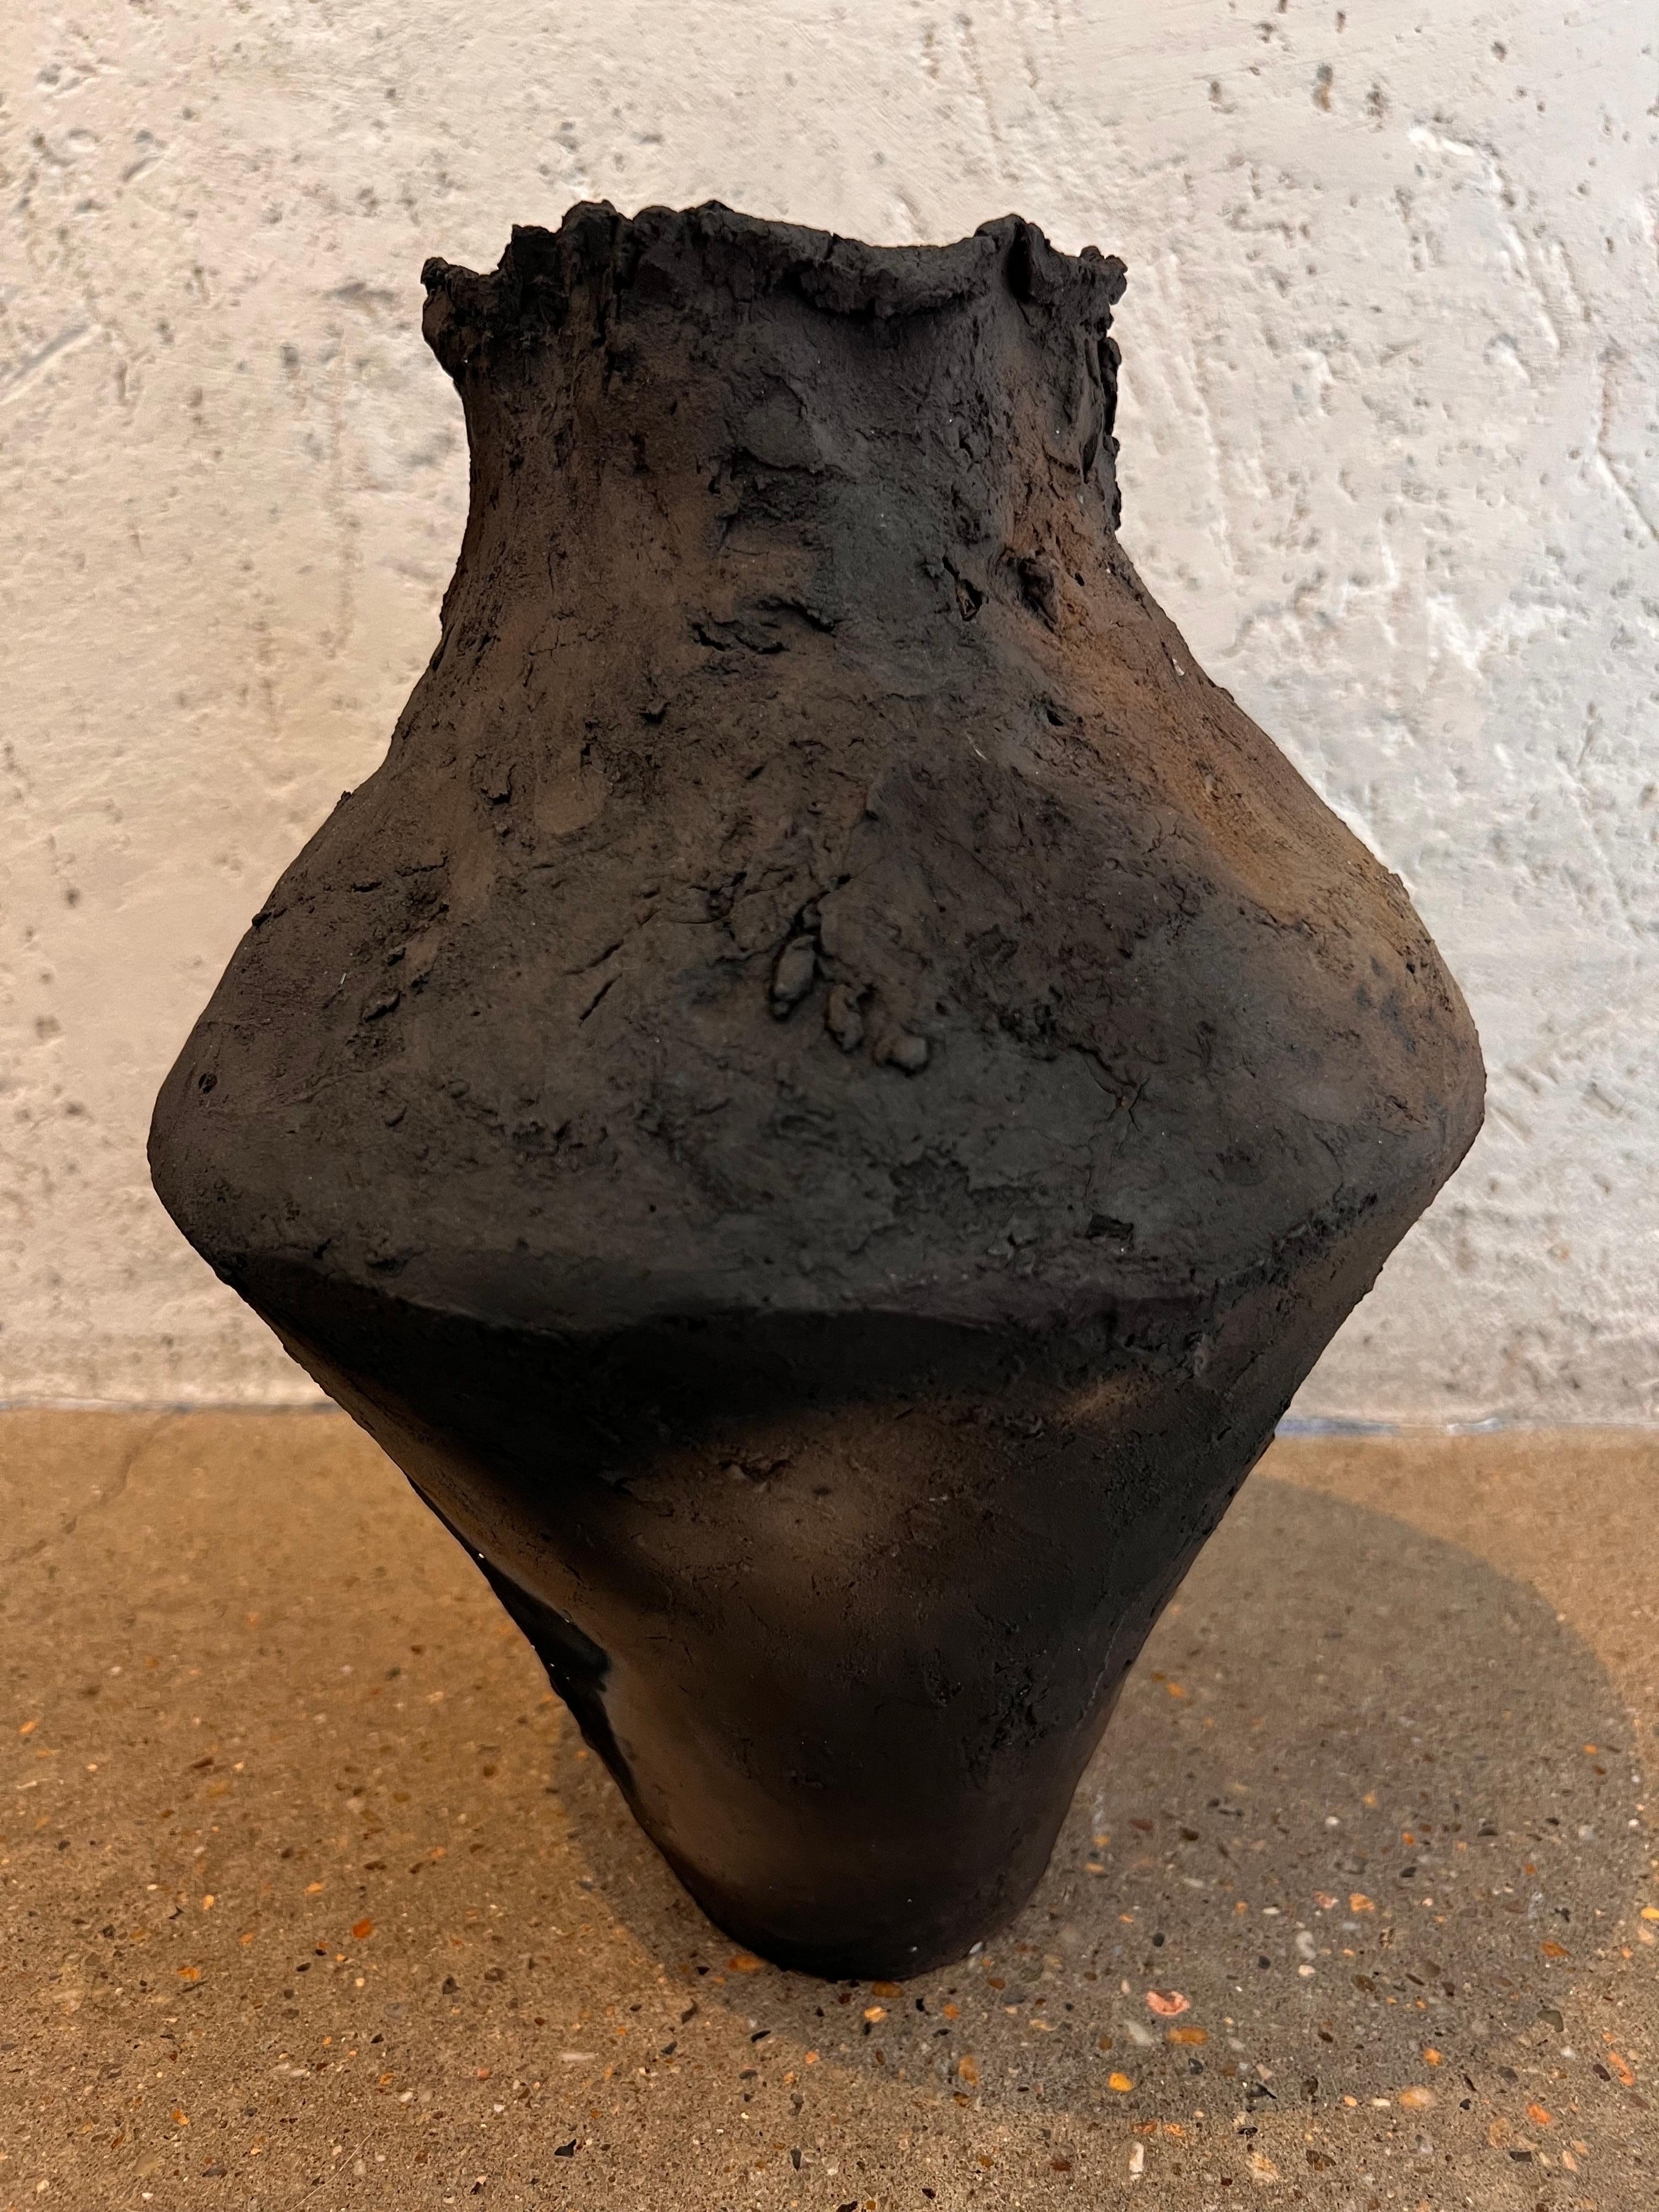 The Rustic Raw quality of the vessel is attributed to the use of hand made clay as opposed to a thrown smooth classic piece. The Primitive look gives this piece a soulful vibe.